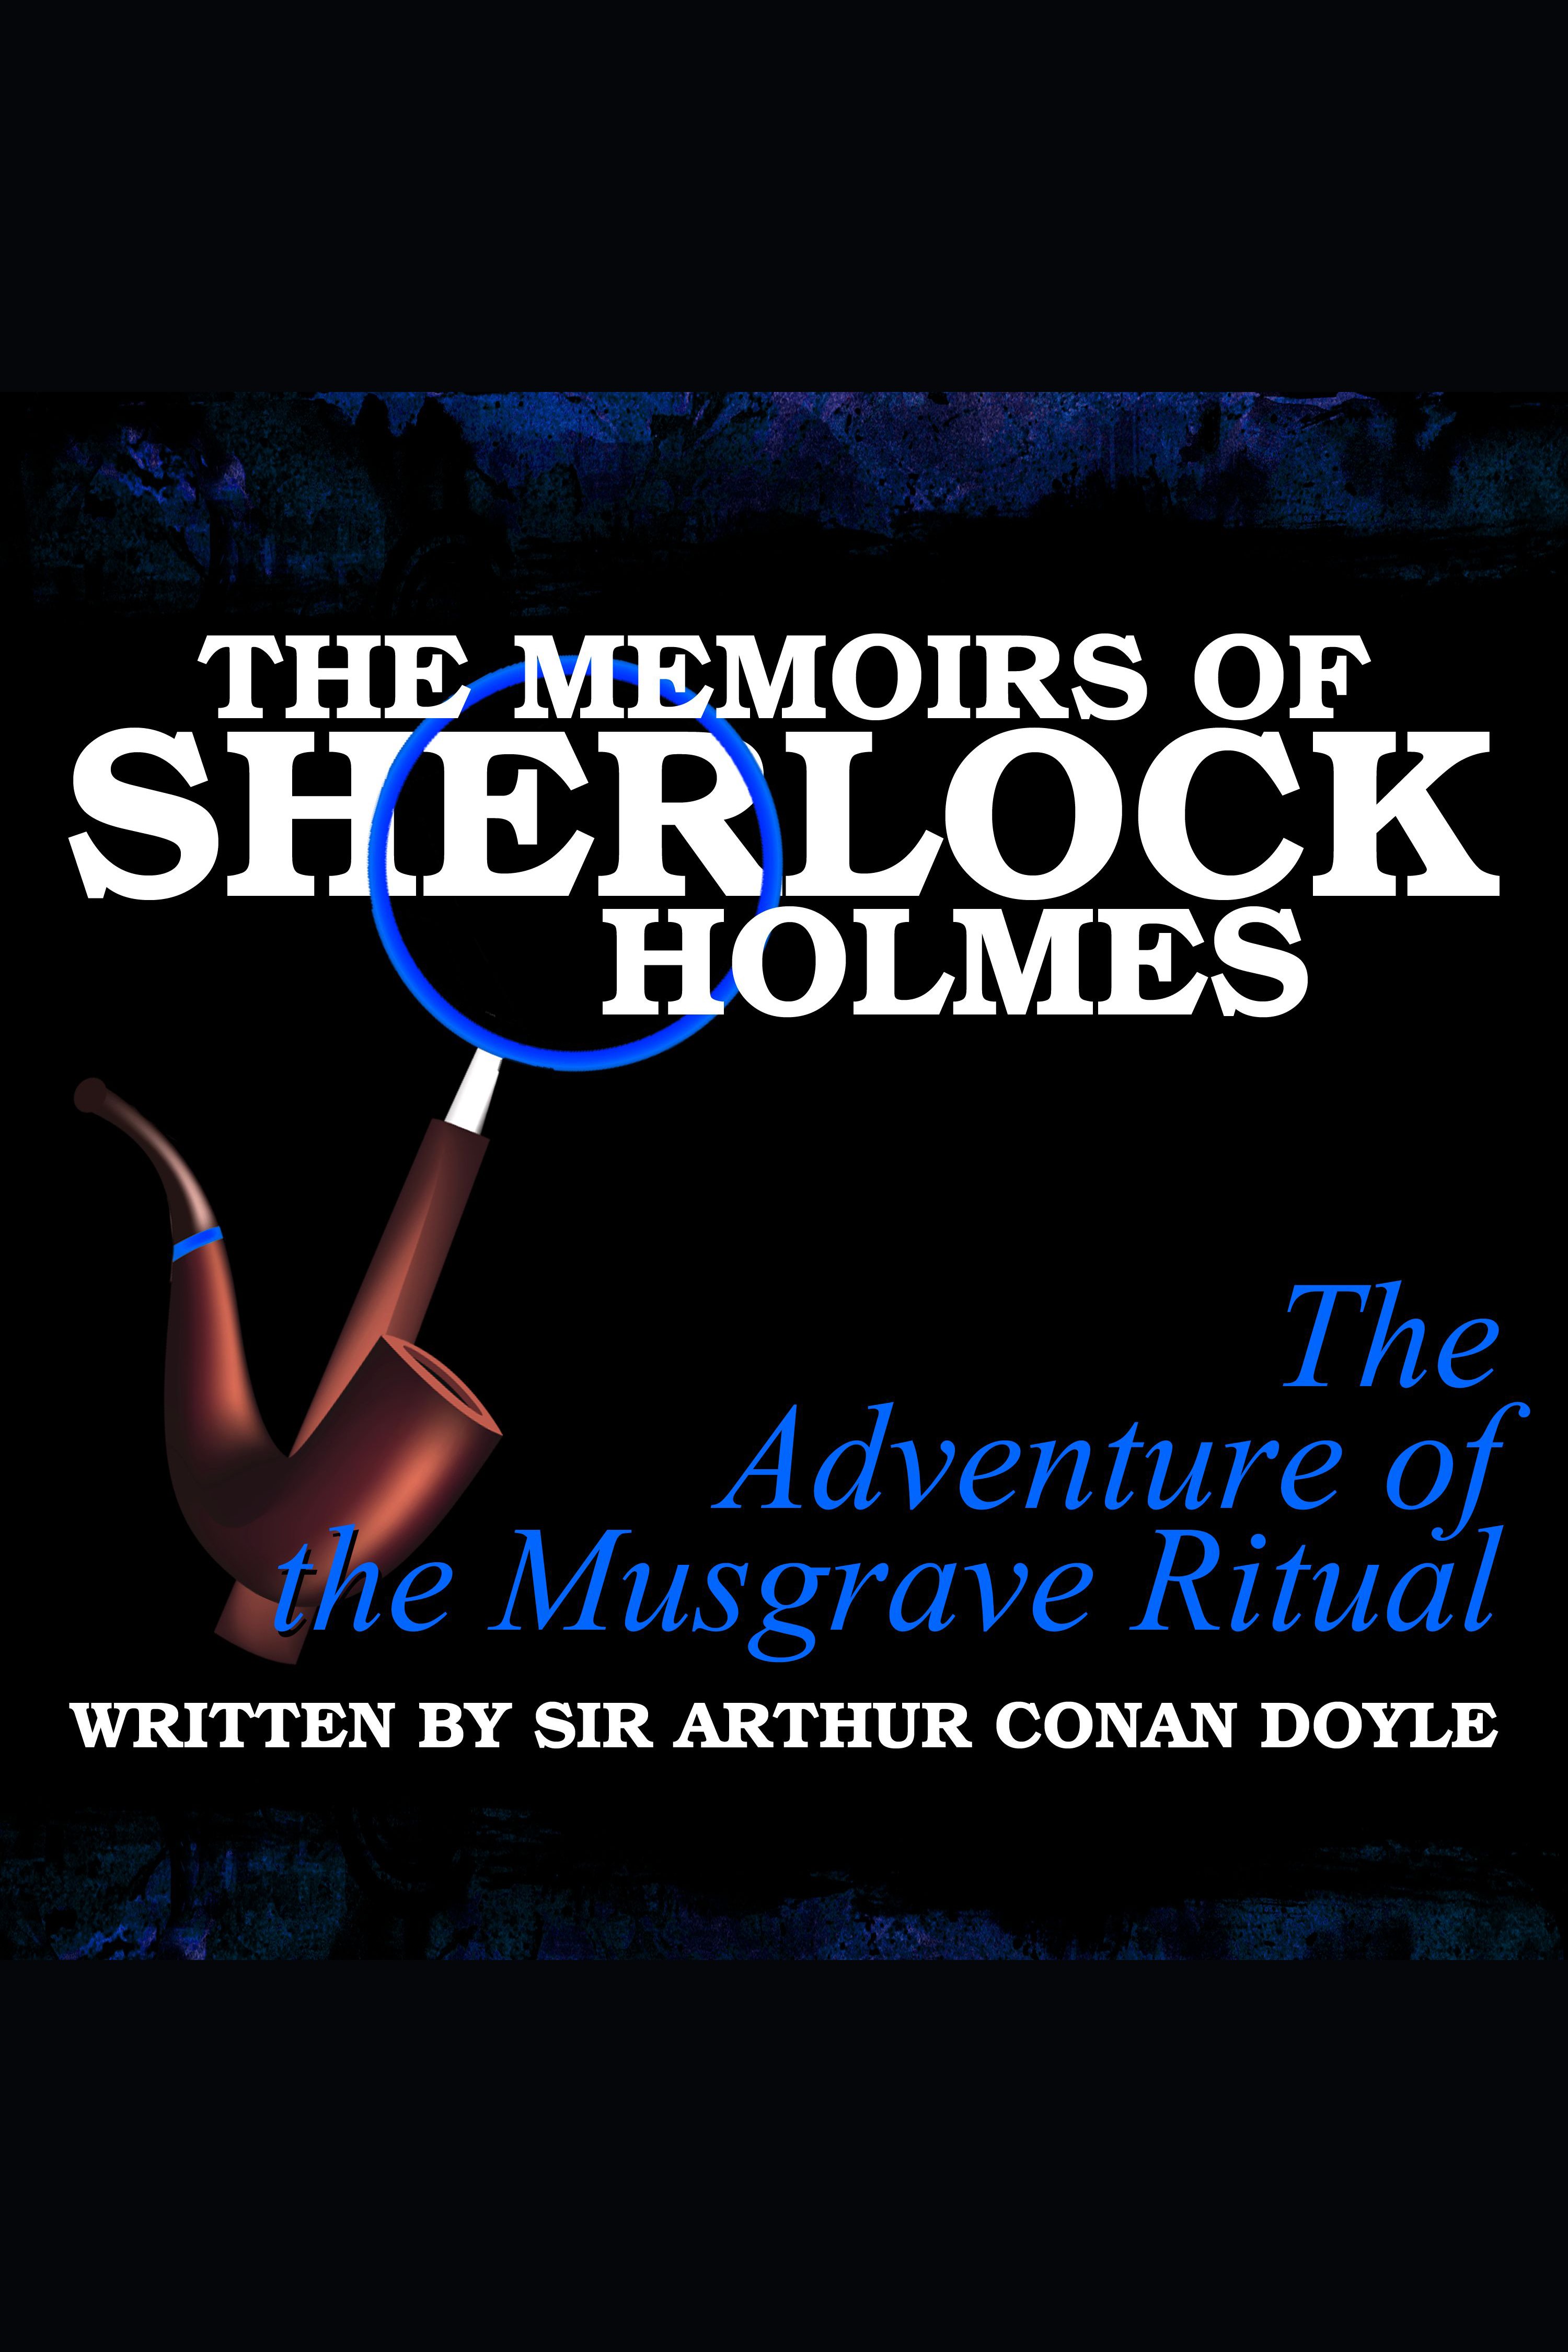 The Memoirs of Sherlock Holmes - The Adventure of the Musgrave Ritual cover image